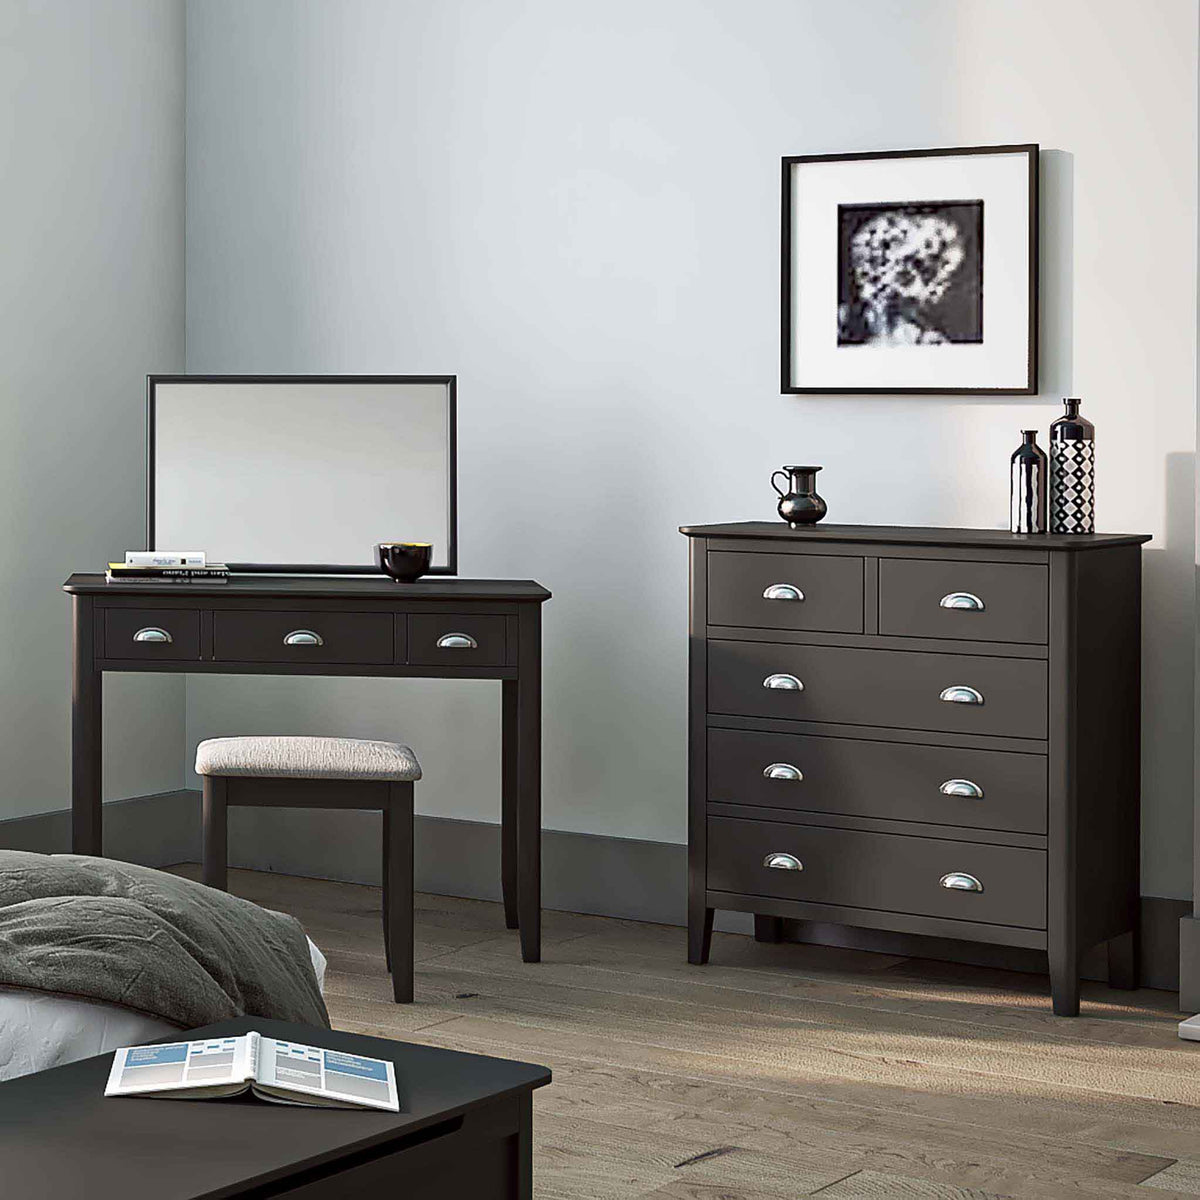 Lifestyle image of the Dumbarton Charcoal Grey " over 3 Chest of Drawers Storage Cabinet